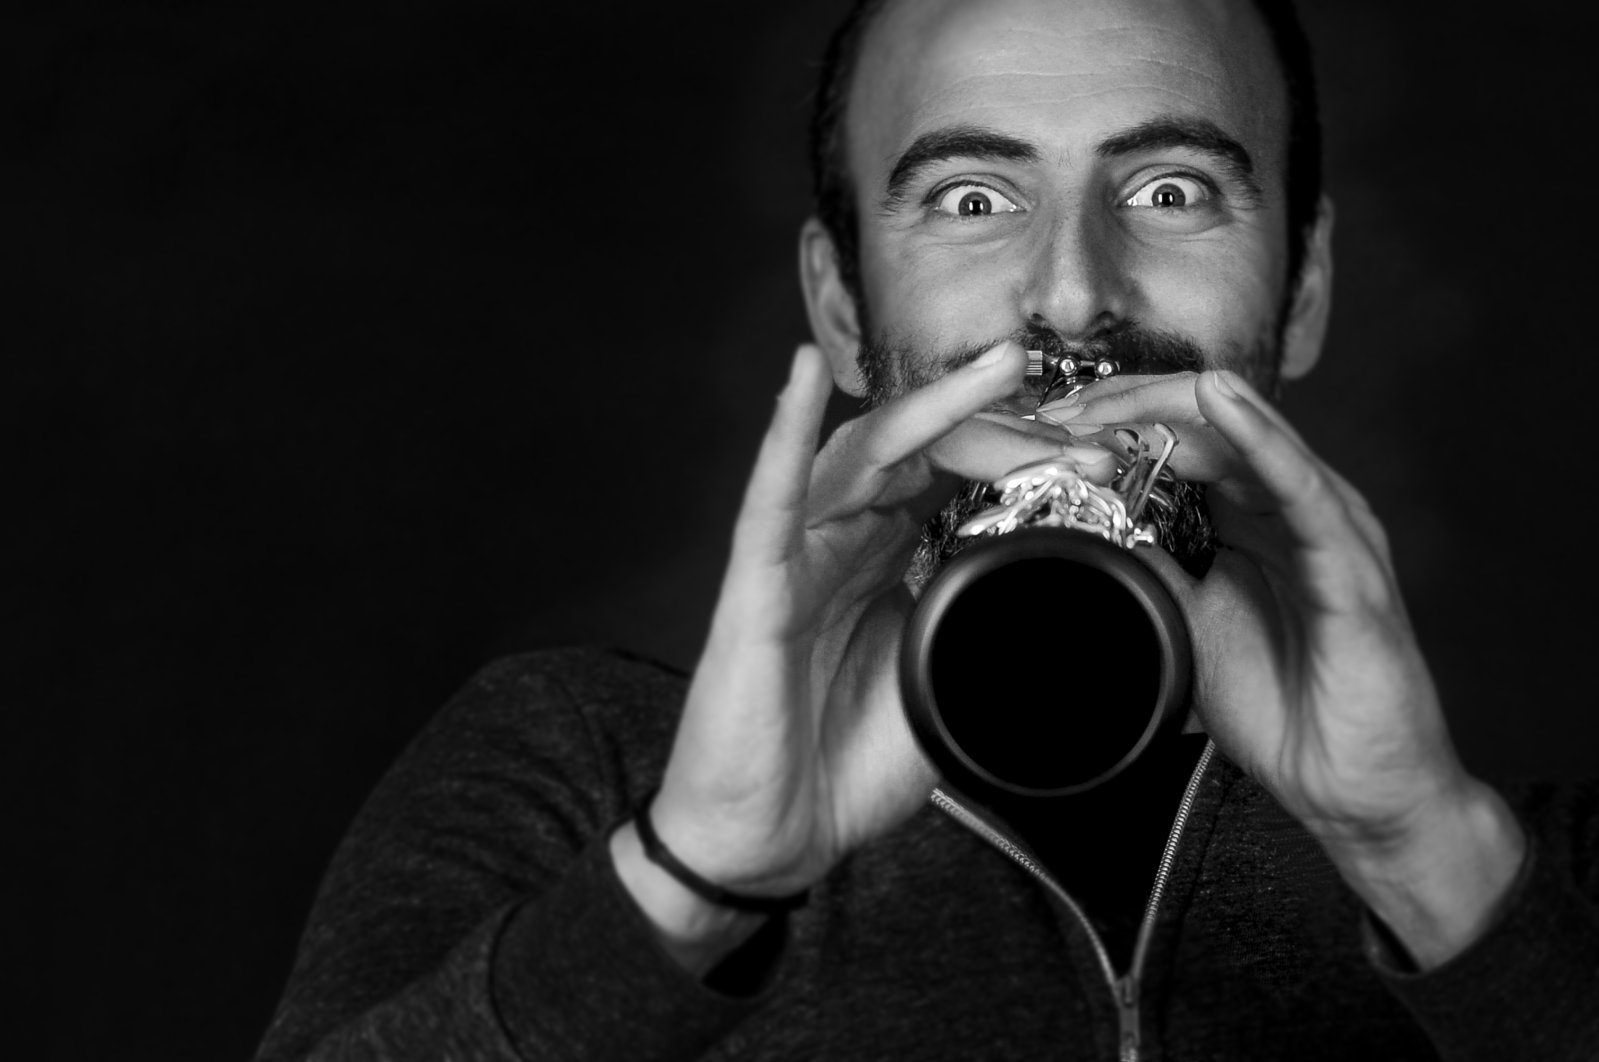 Syrian clarinet master Kinan Azmeh will be a guest of the festival with his band Cityband on June 17. (Courtesy of IKSV)